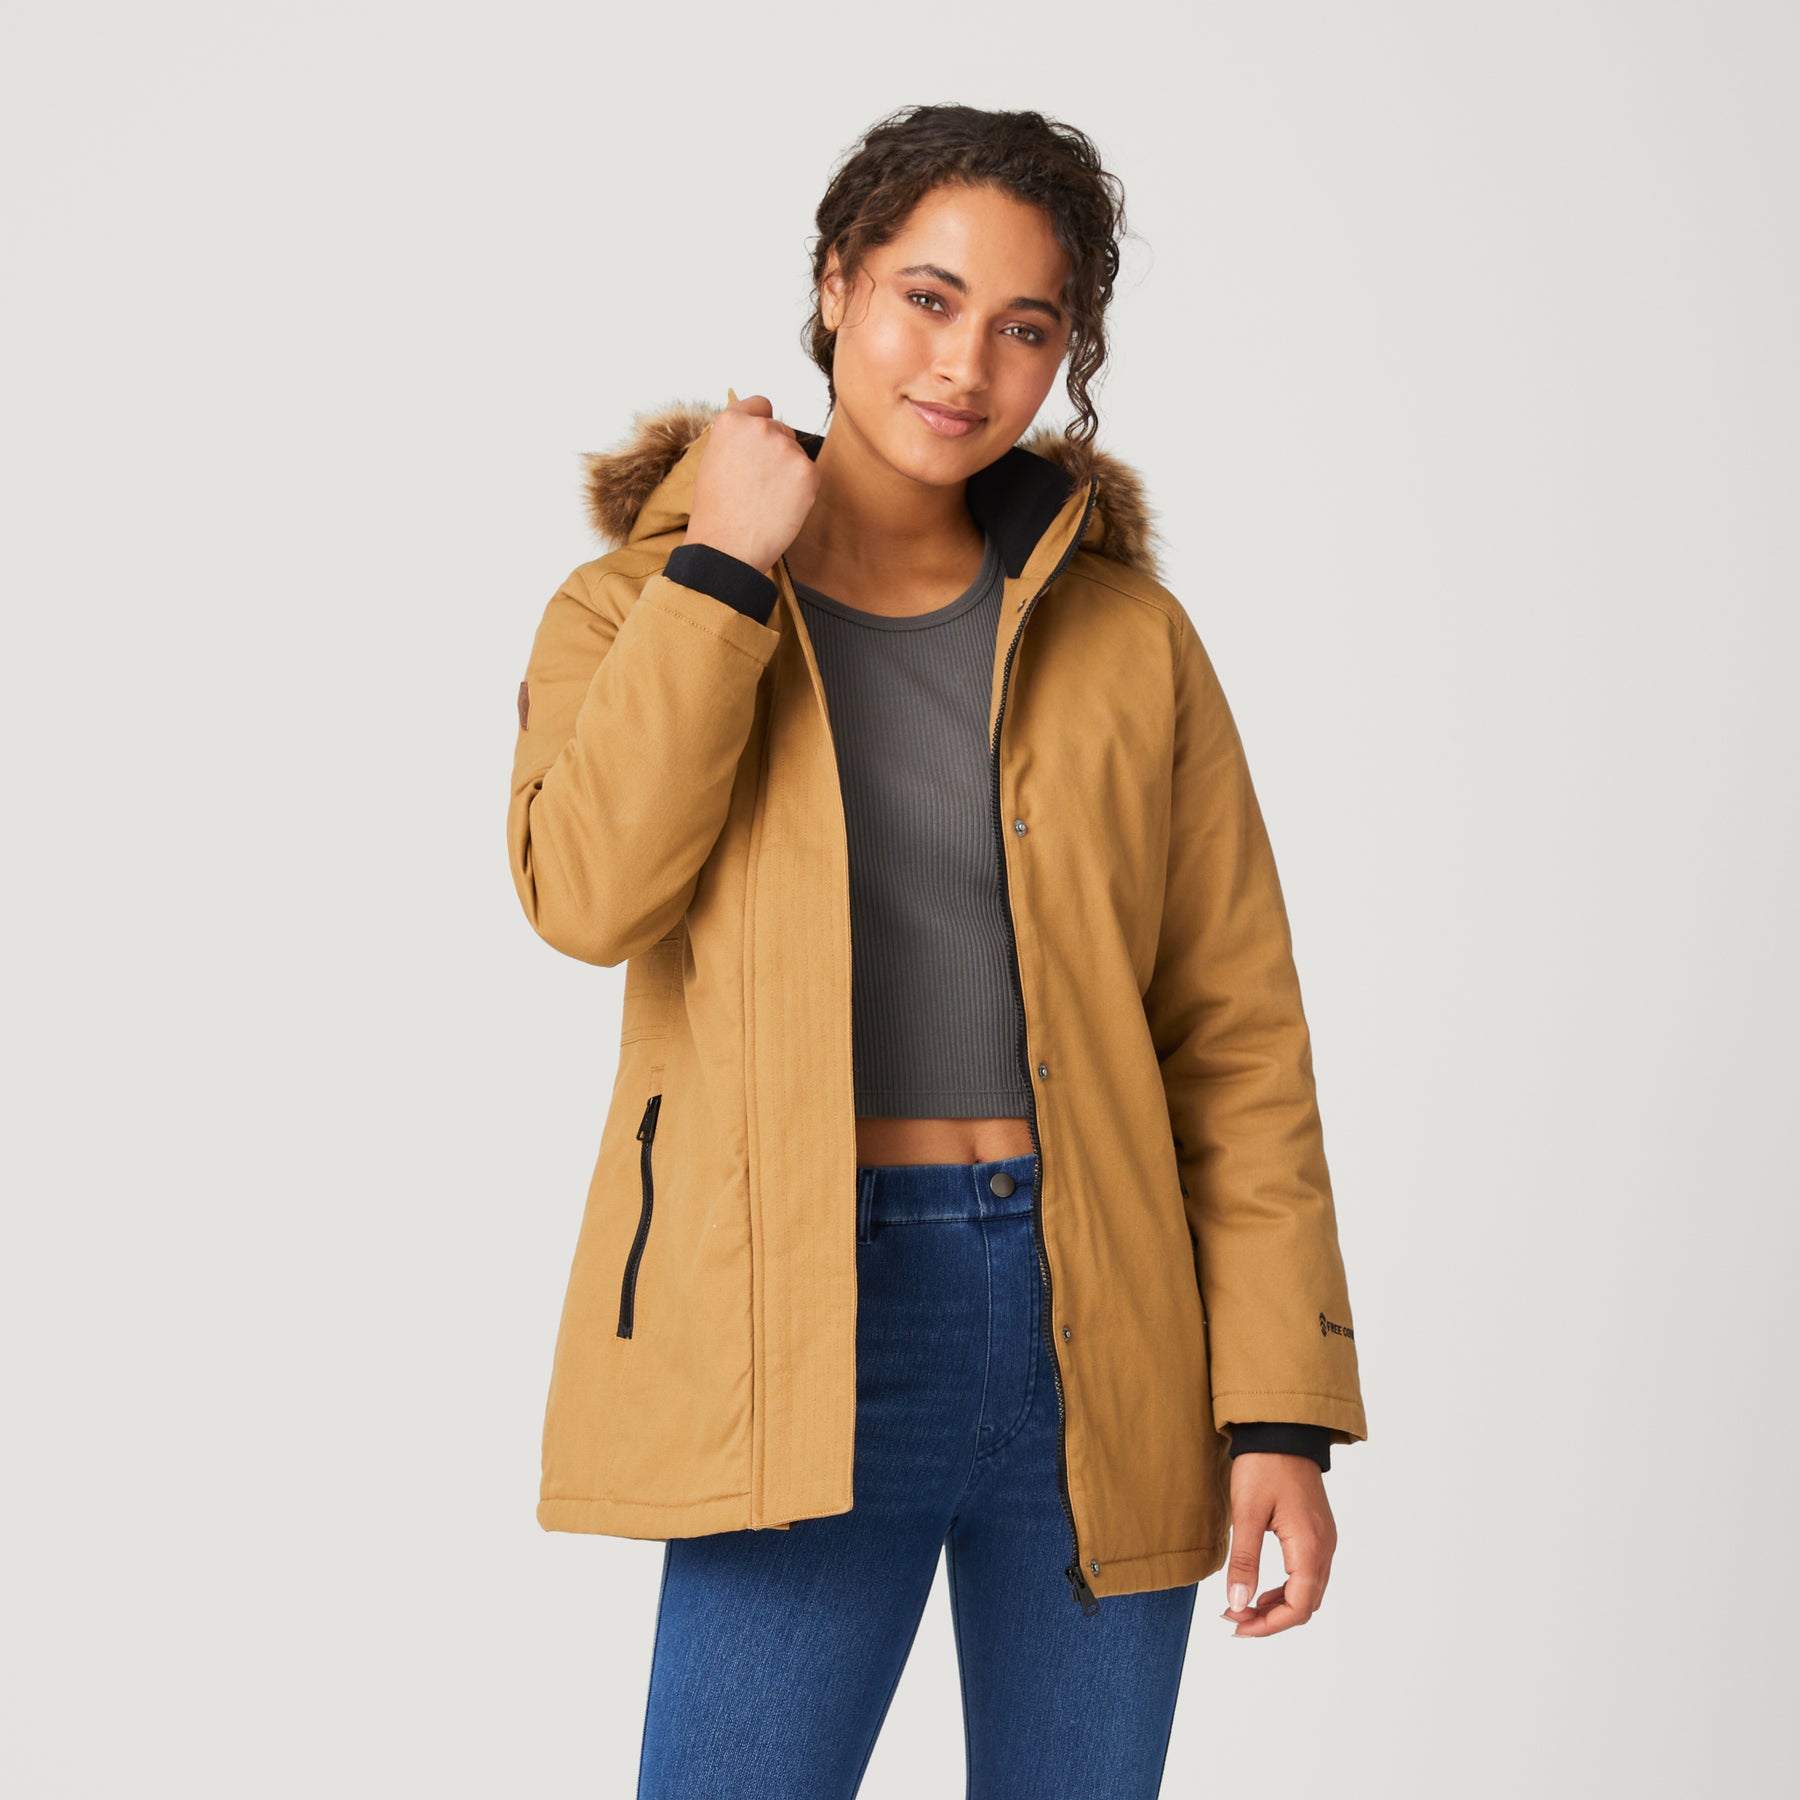 Women's Vanguard Parka Jacket by Free Country